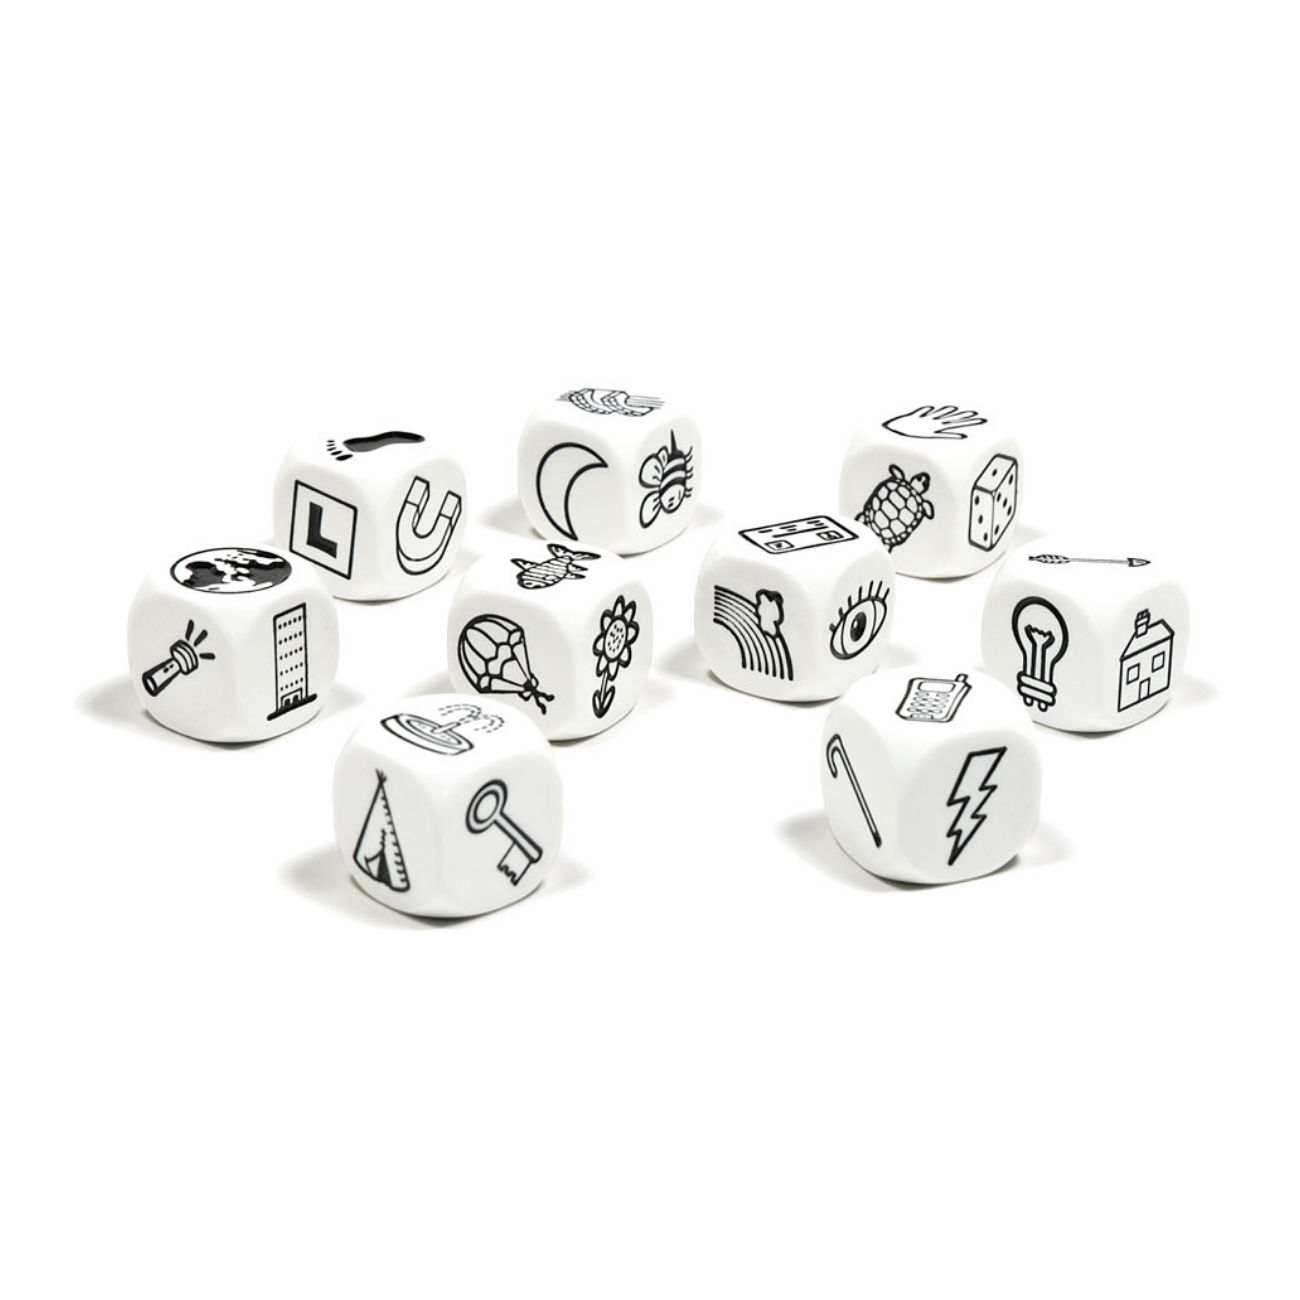 Rory's Story Cubes – Child's Play